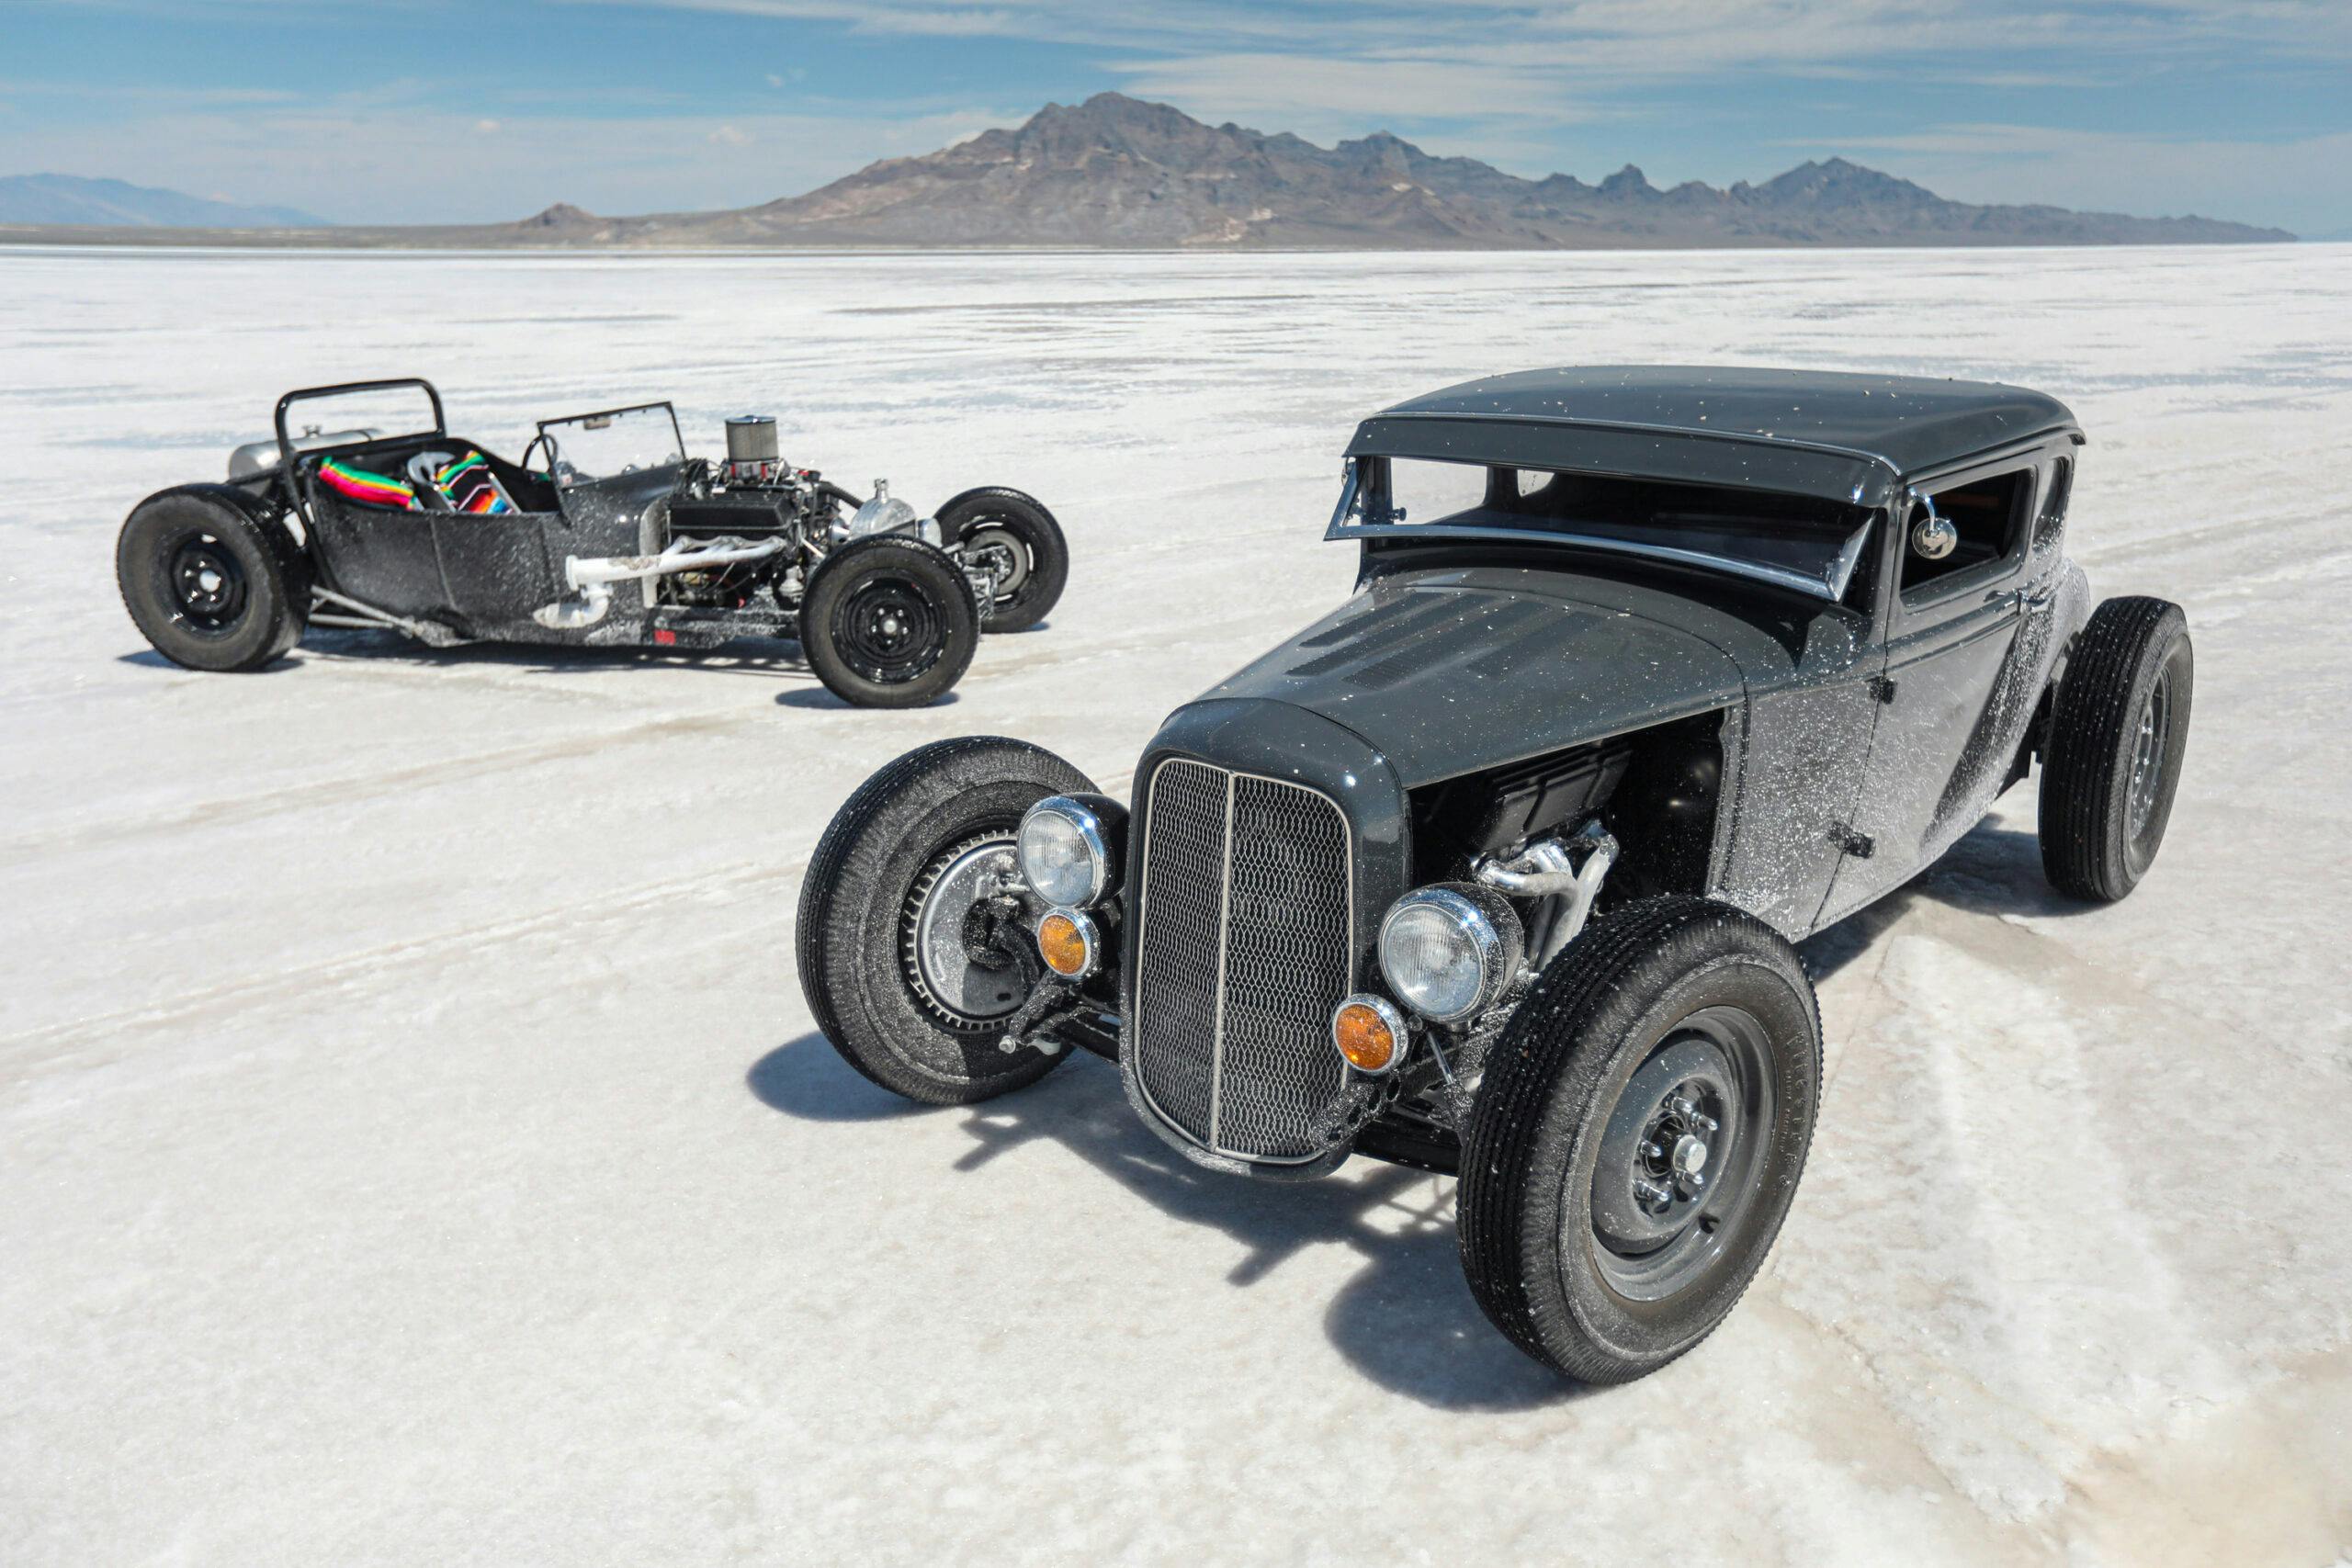 These Salty Homebuilt Fords Remind Us What Hot Rods Are All About